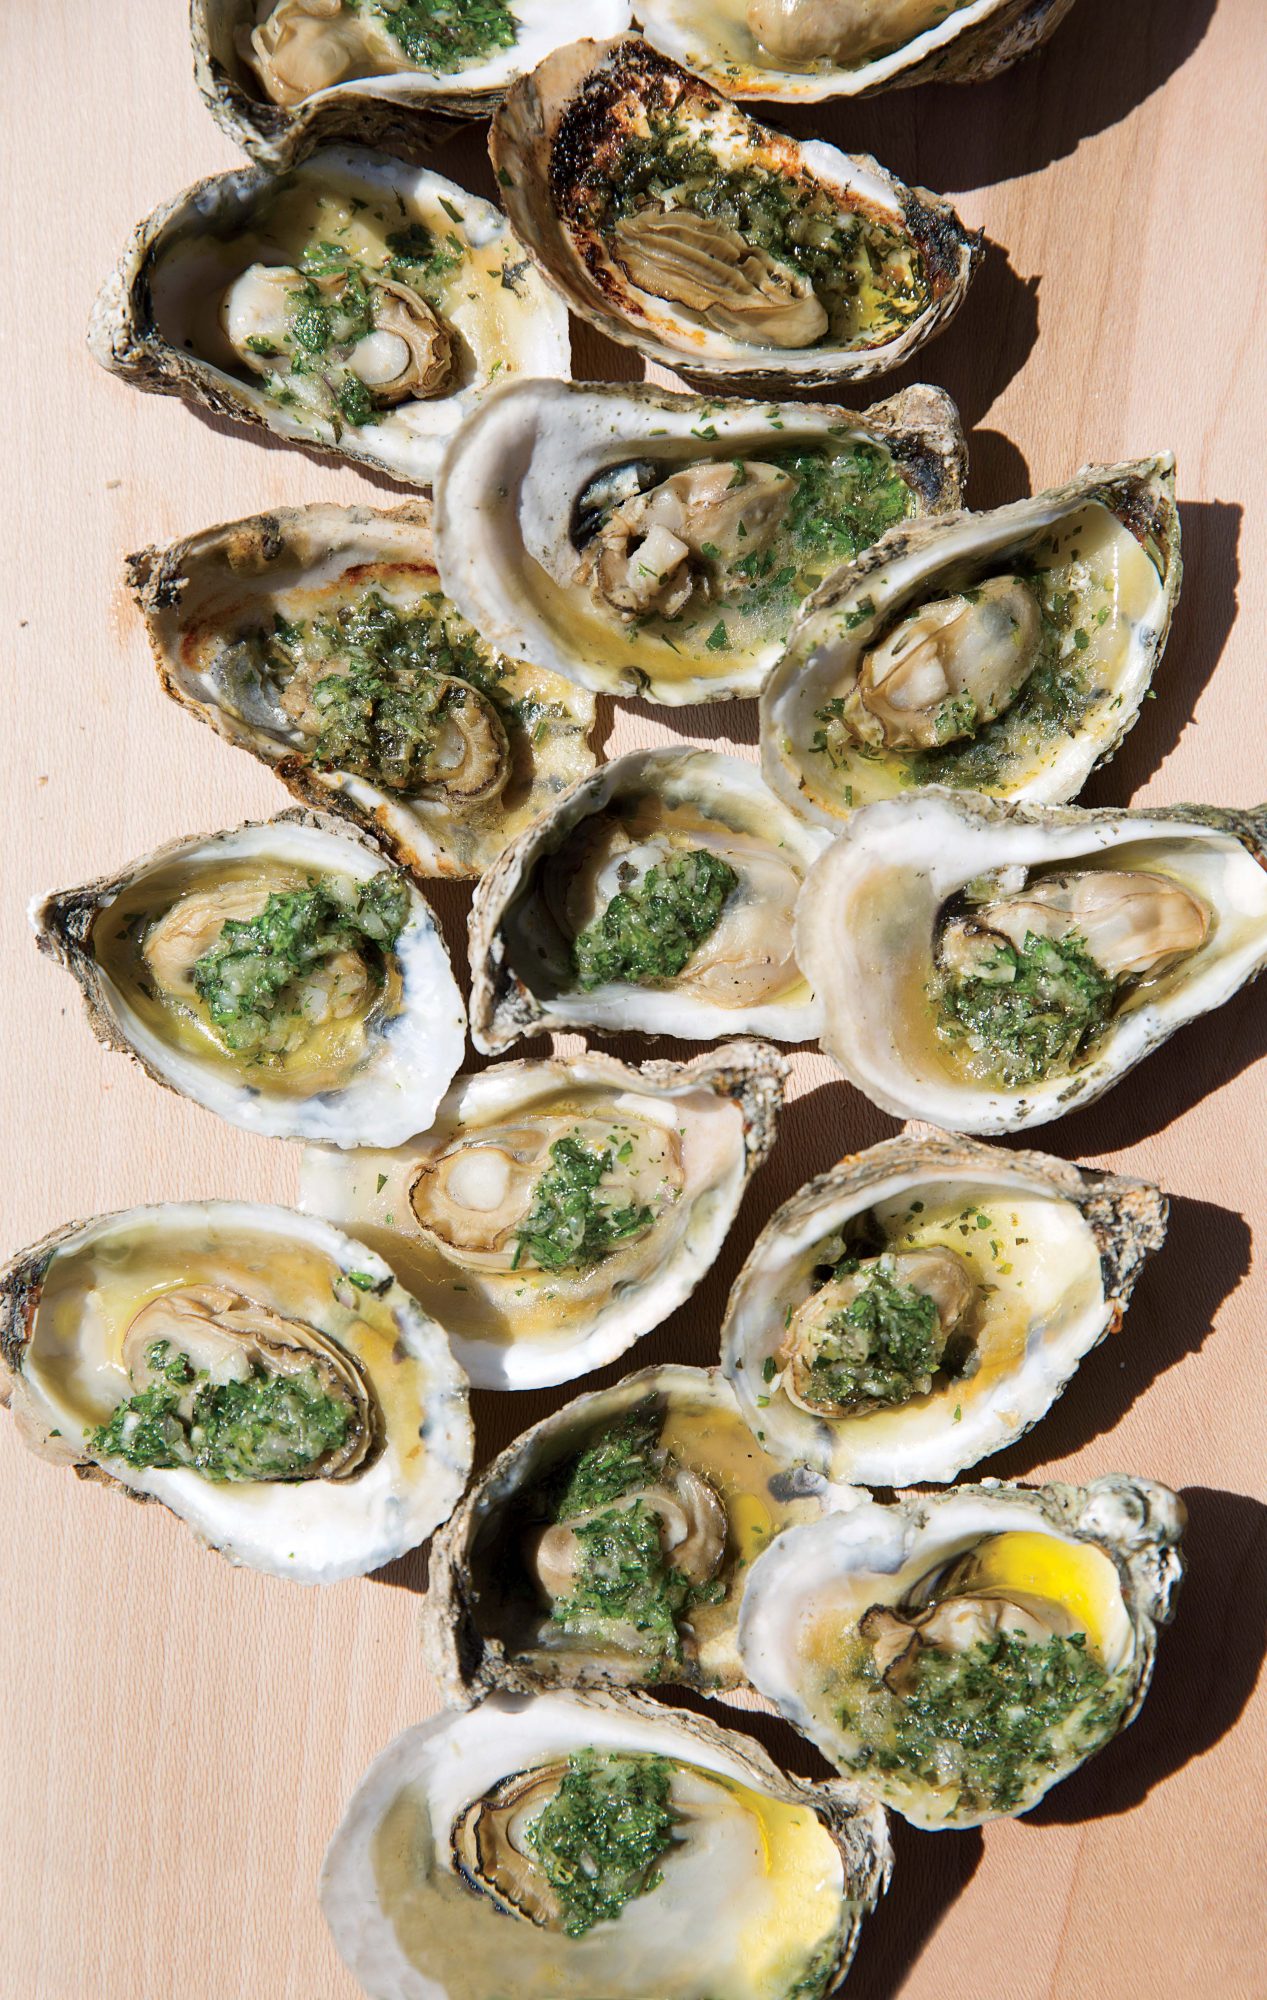 Grilled Oysters with Tarragon-Parsley Butter